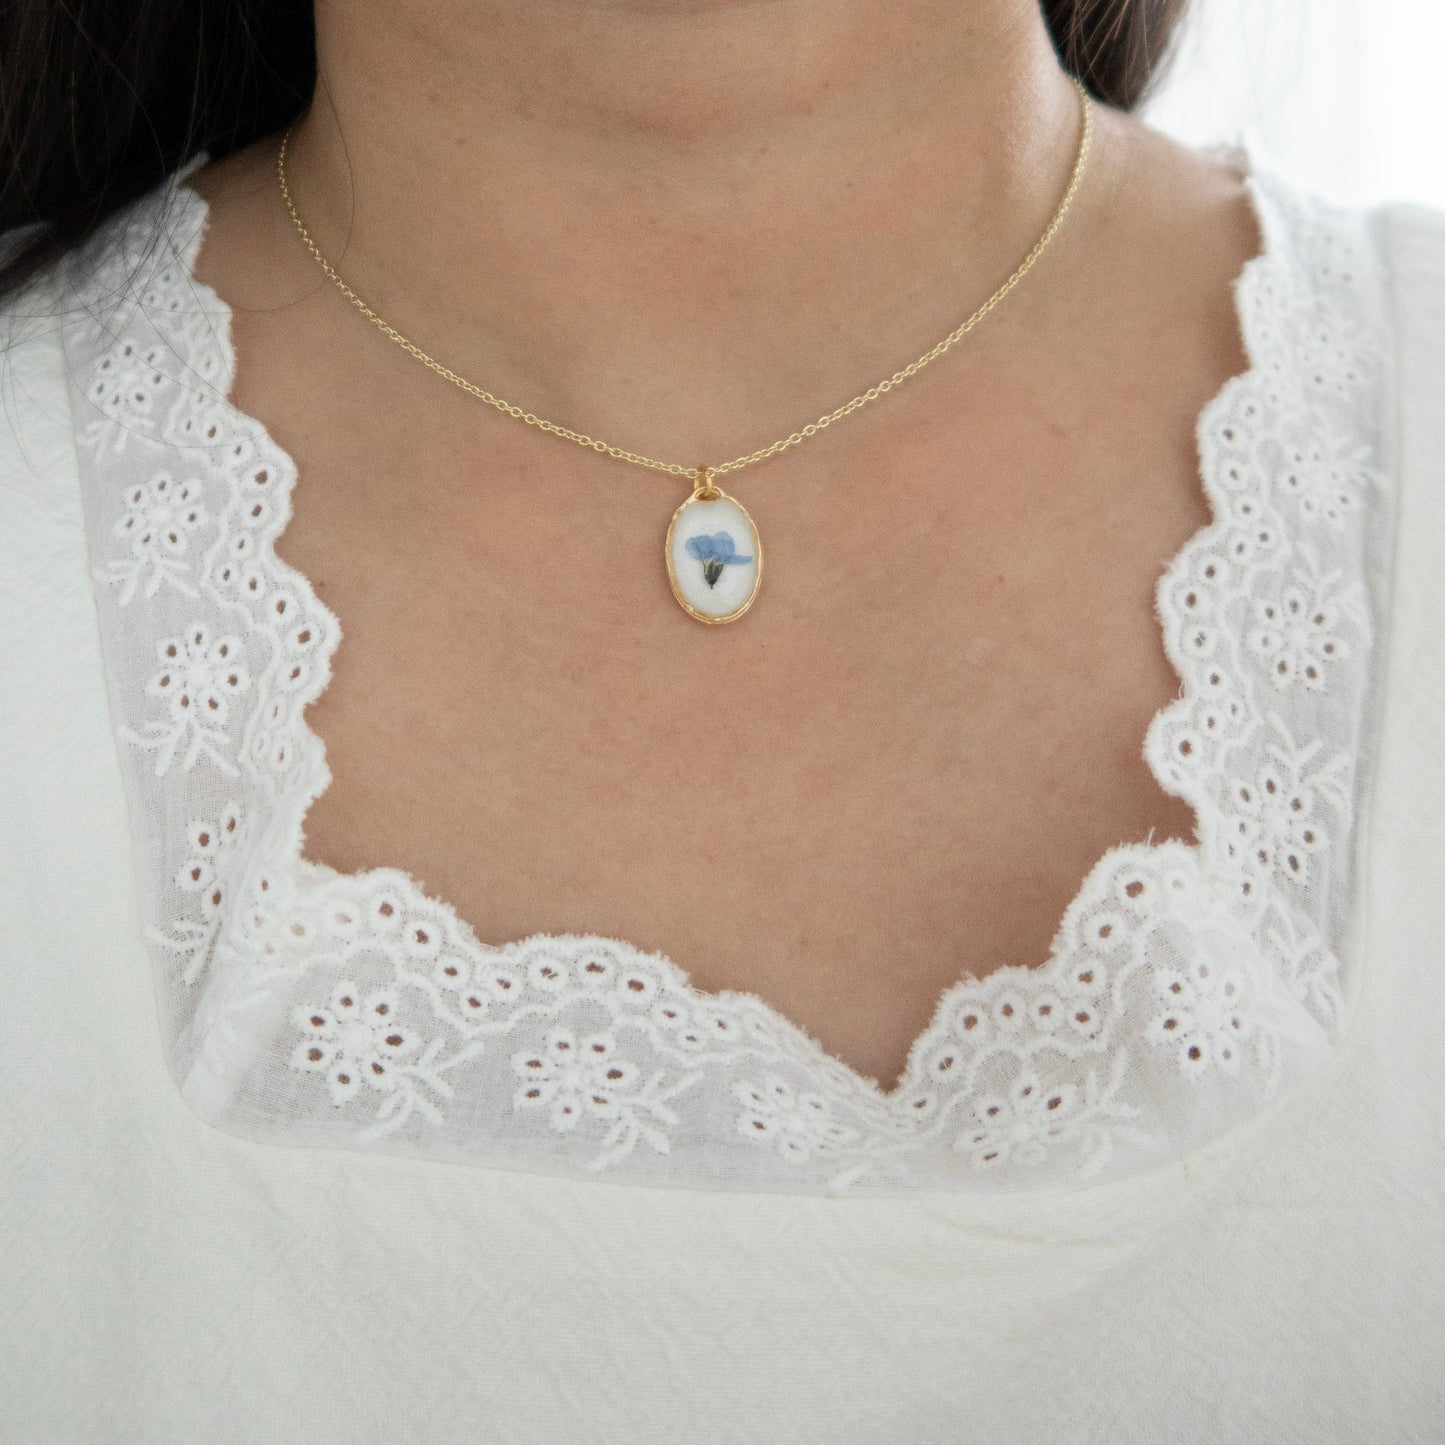 The Petit Forget Me Not Necklace